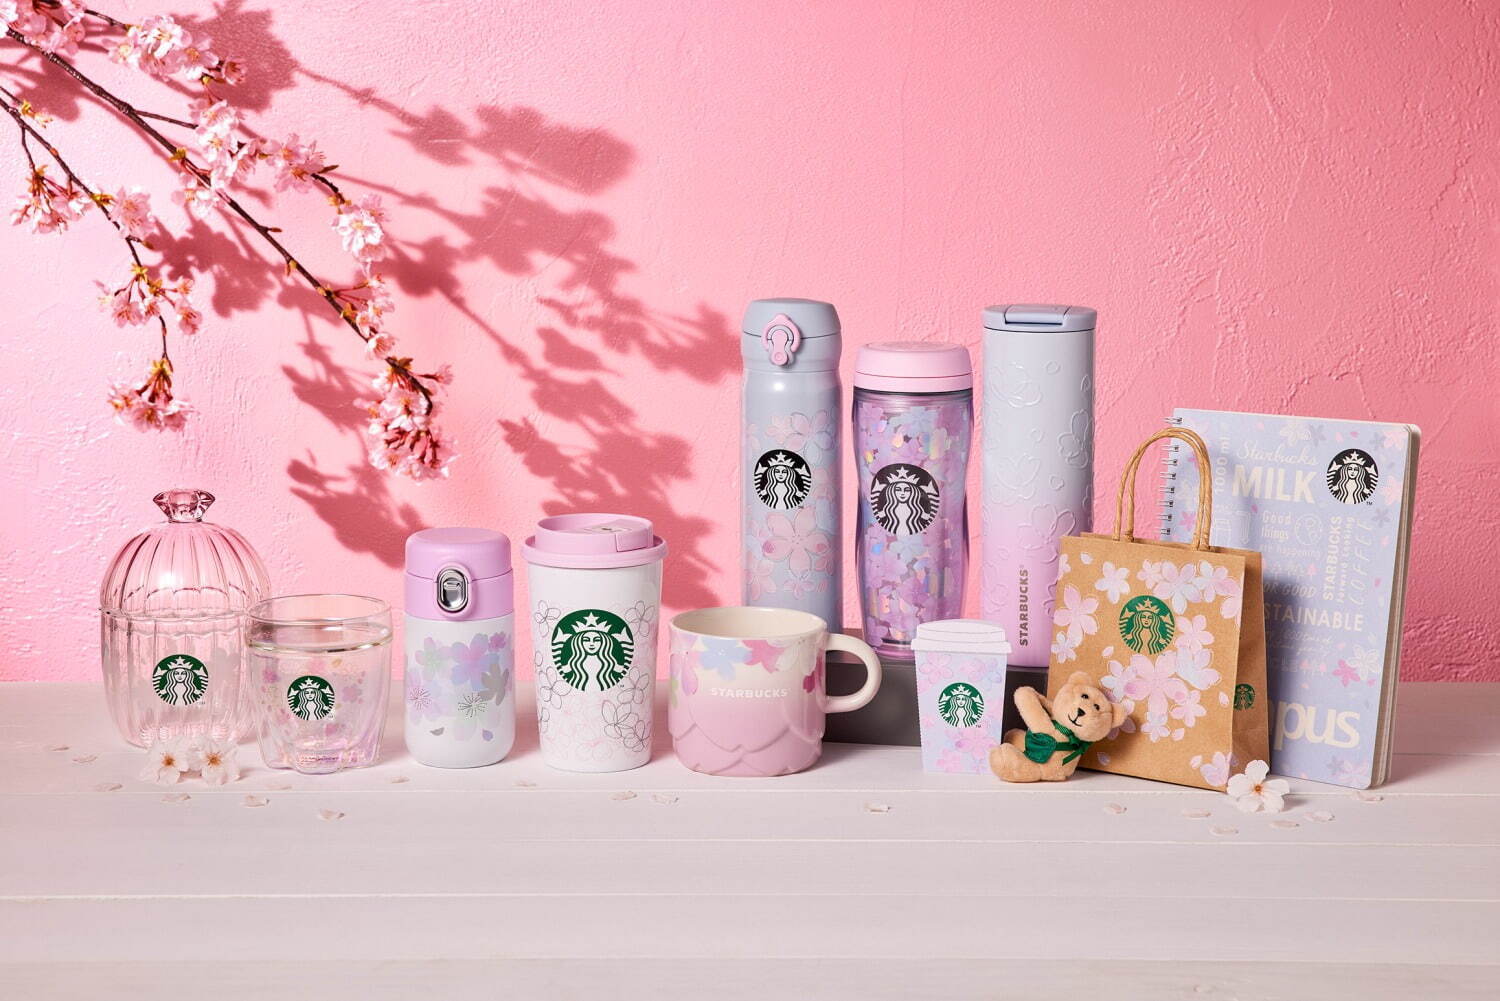 Starbucks Japan’s new sakura drinkware collection captures “beauty and fragility” of the blooms